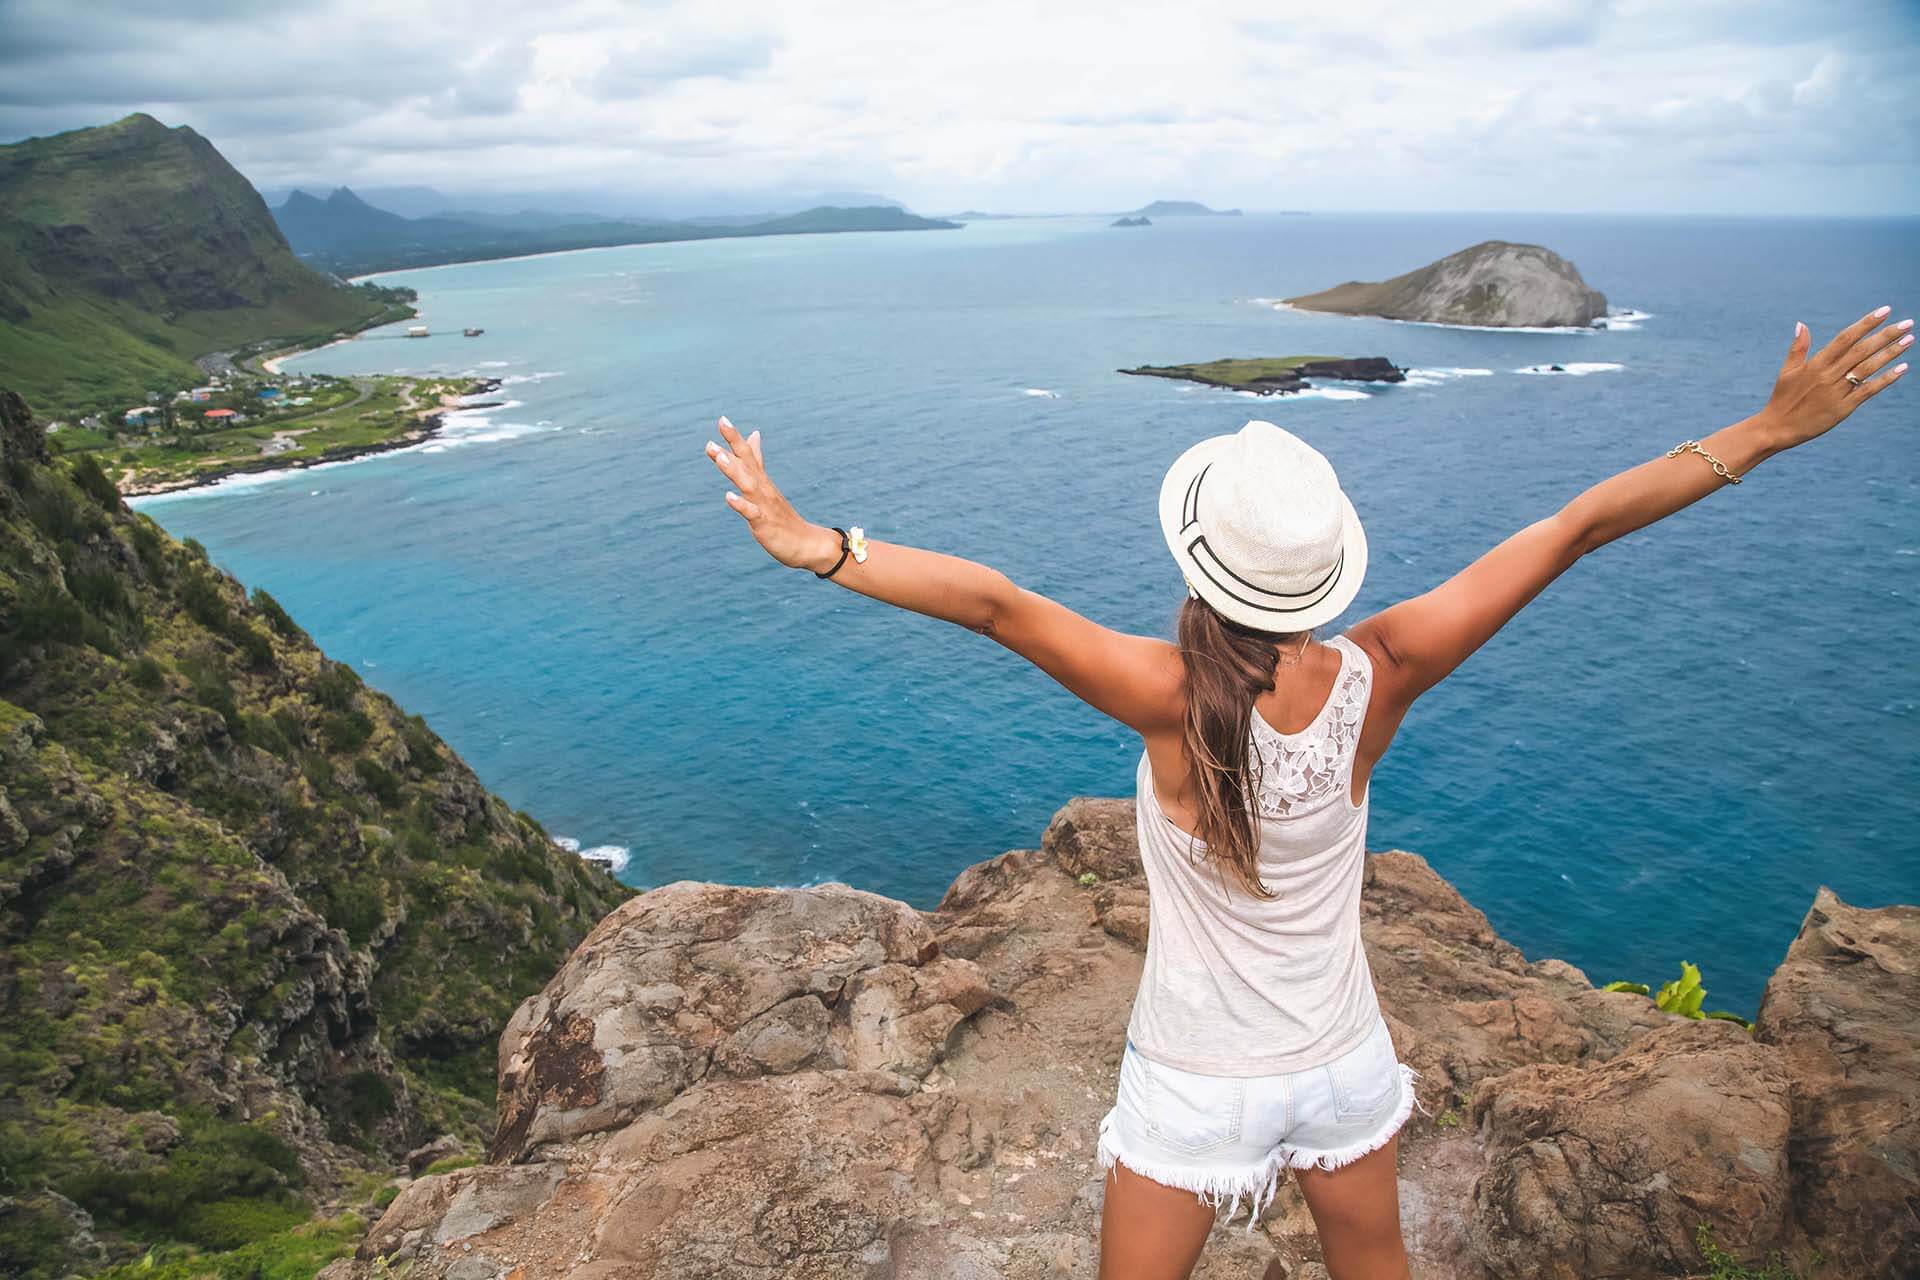 A young woman with her arms stretched out standing on a cliff overlooking the Hawaiian coastline